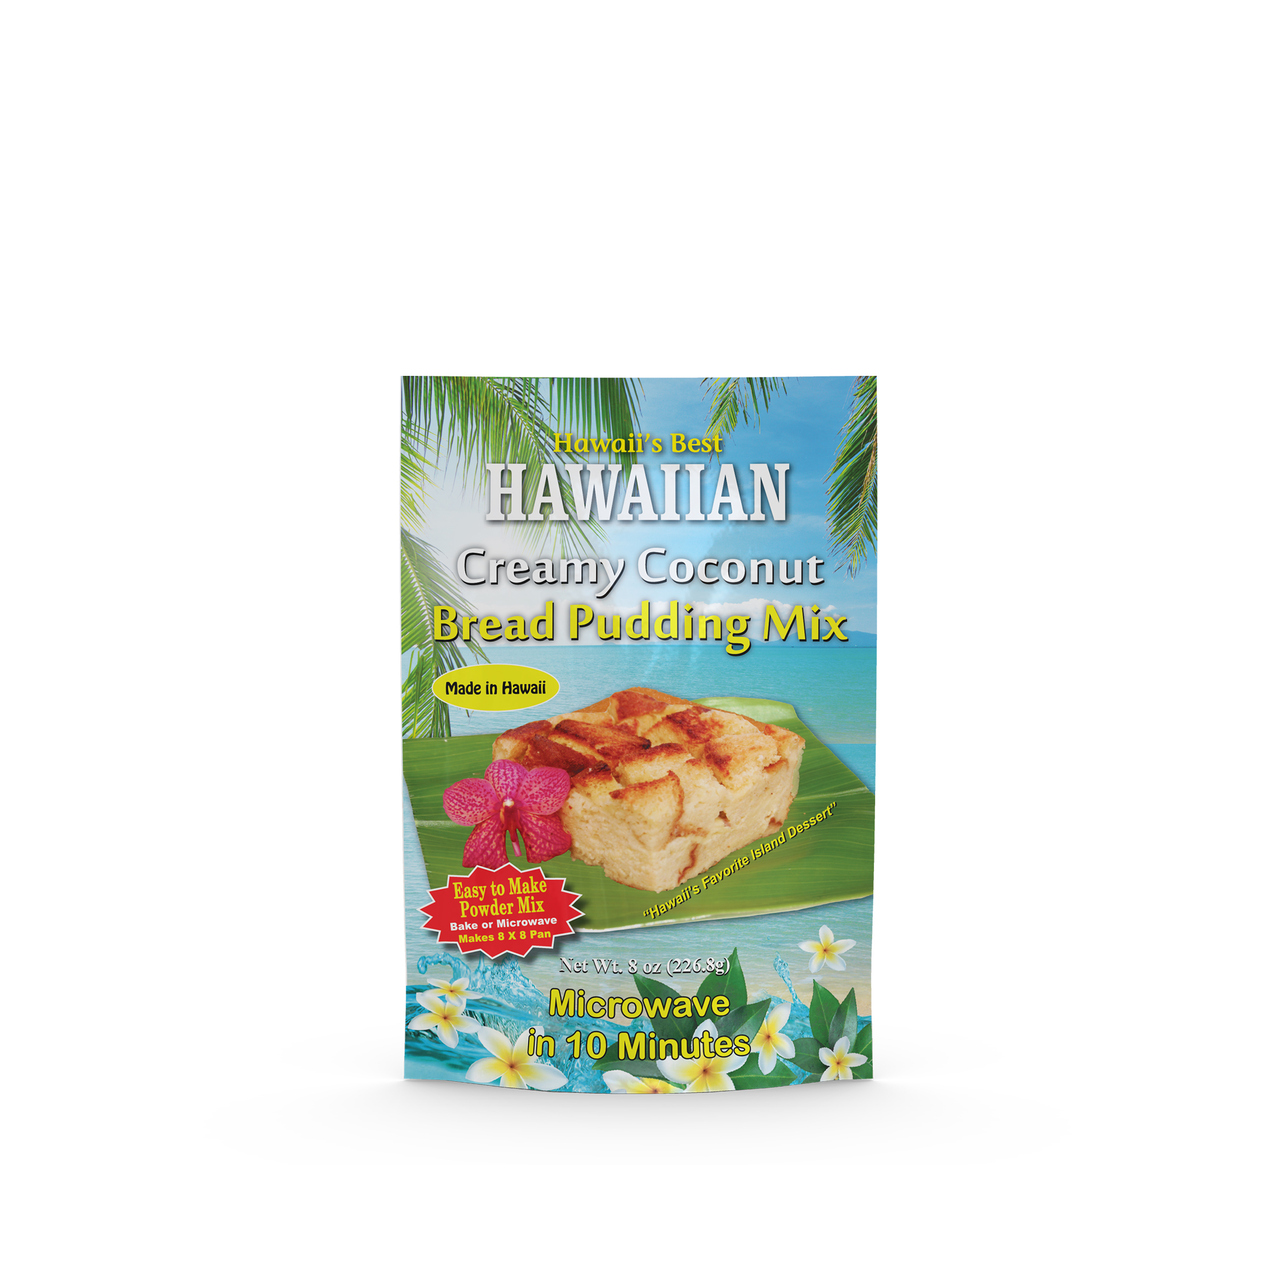 HAWAII'S BEST CREAMY COCONUT BREAD PUDDING MIX, 8 Ounces 